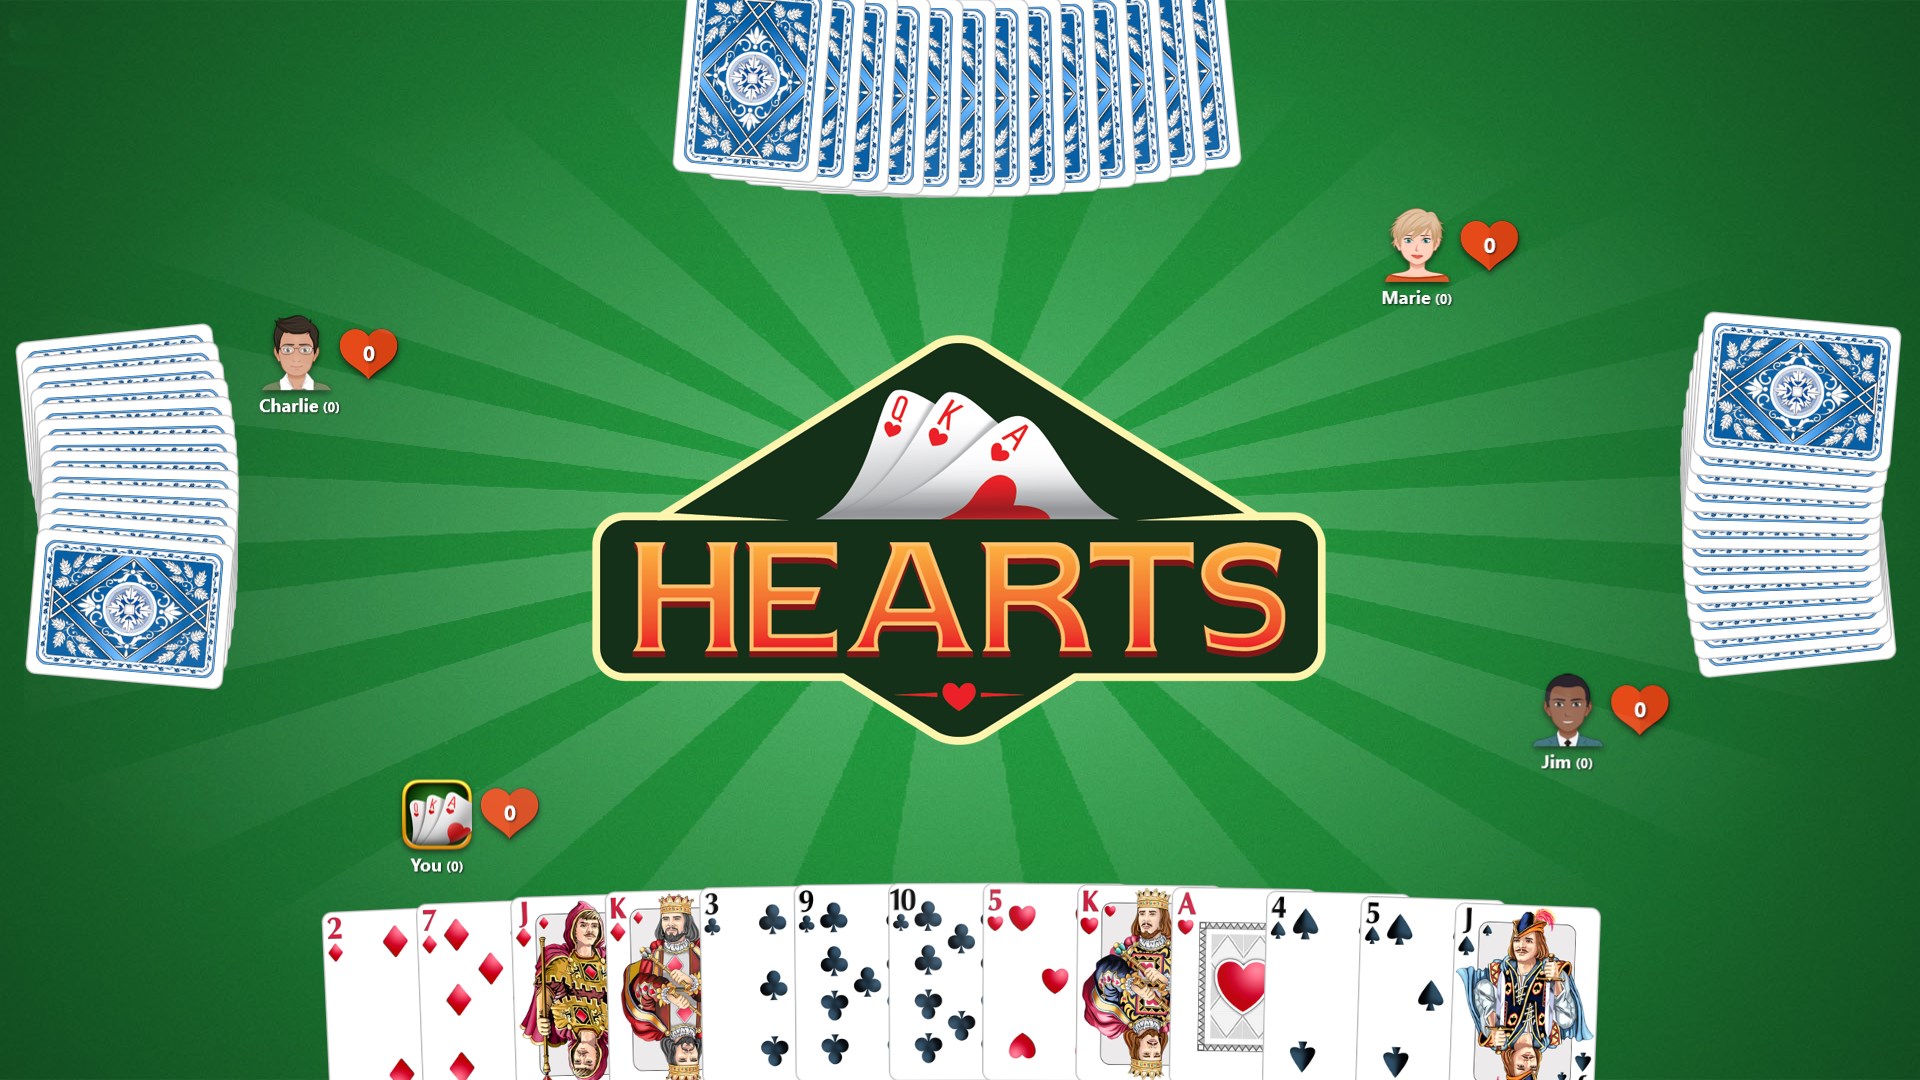 Free hearts download for pc 64 bit vlc player download windows 7